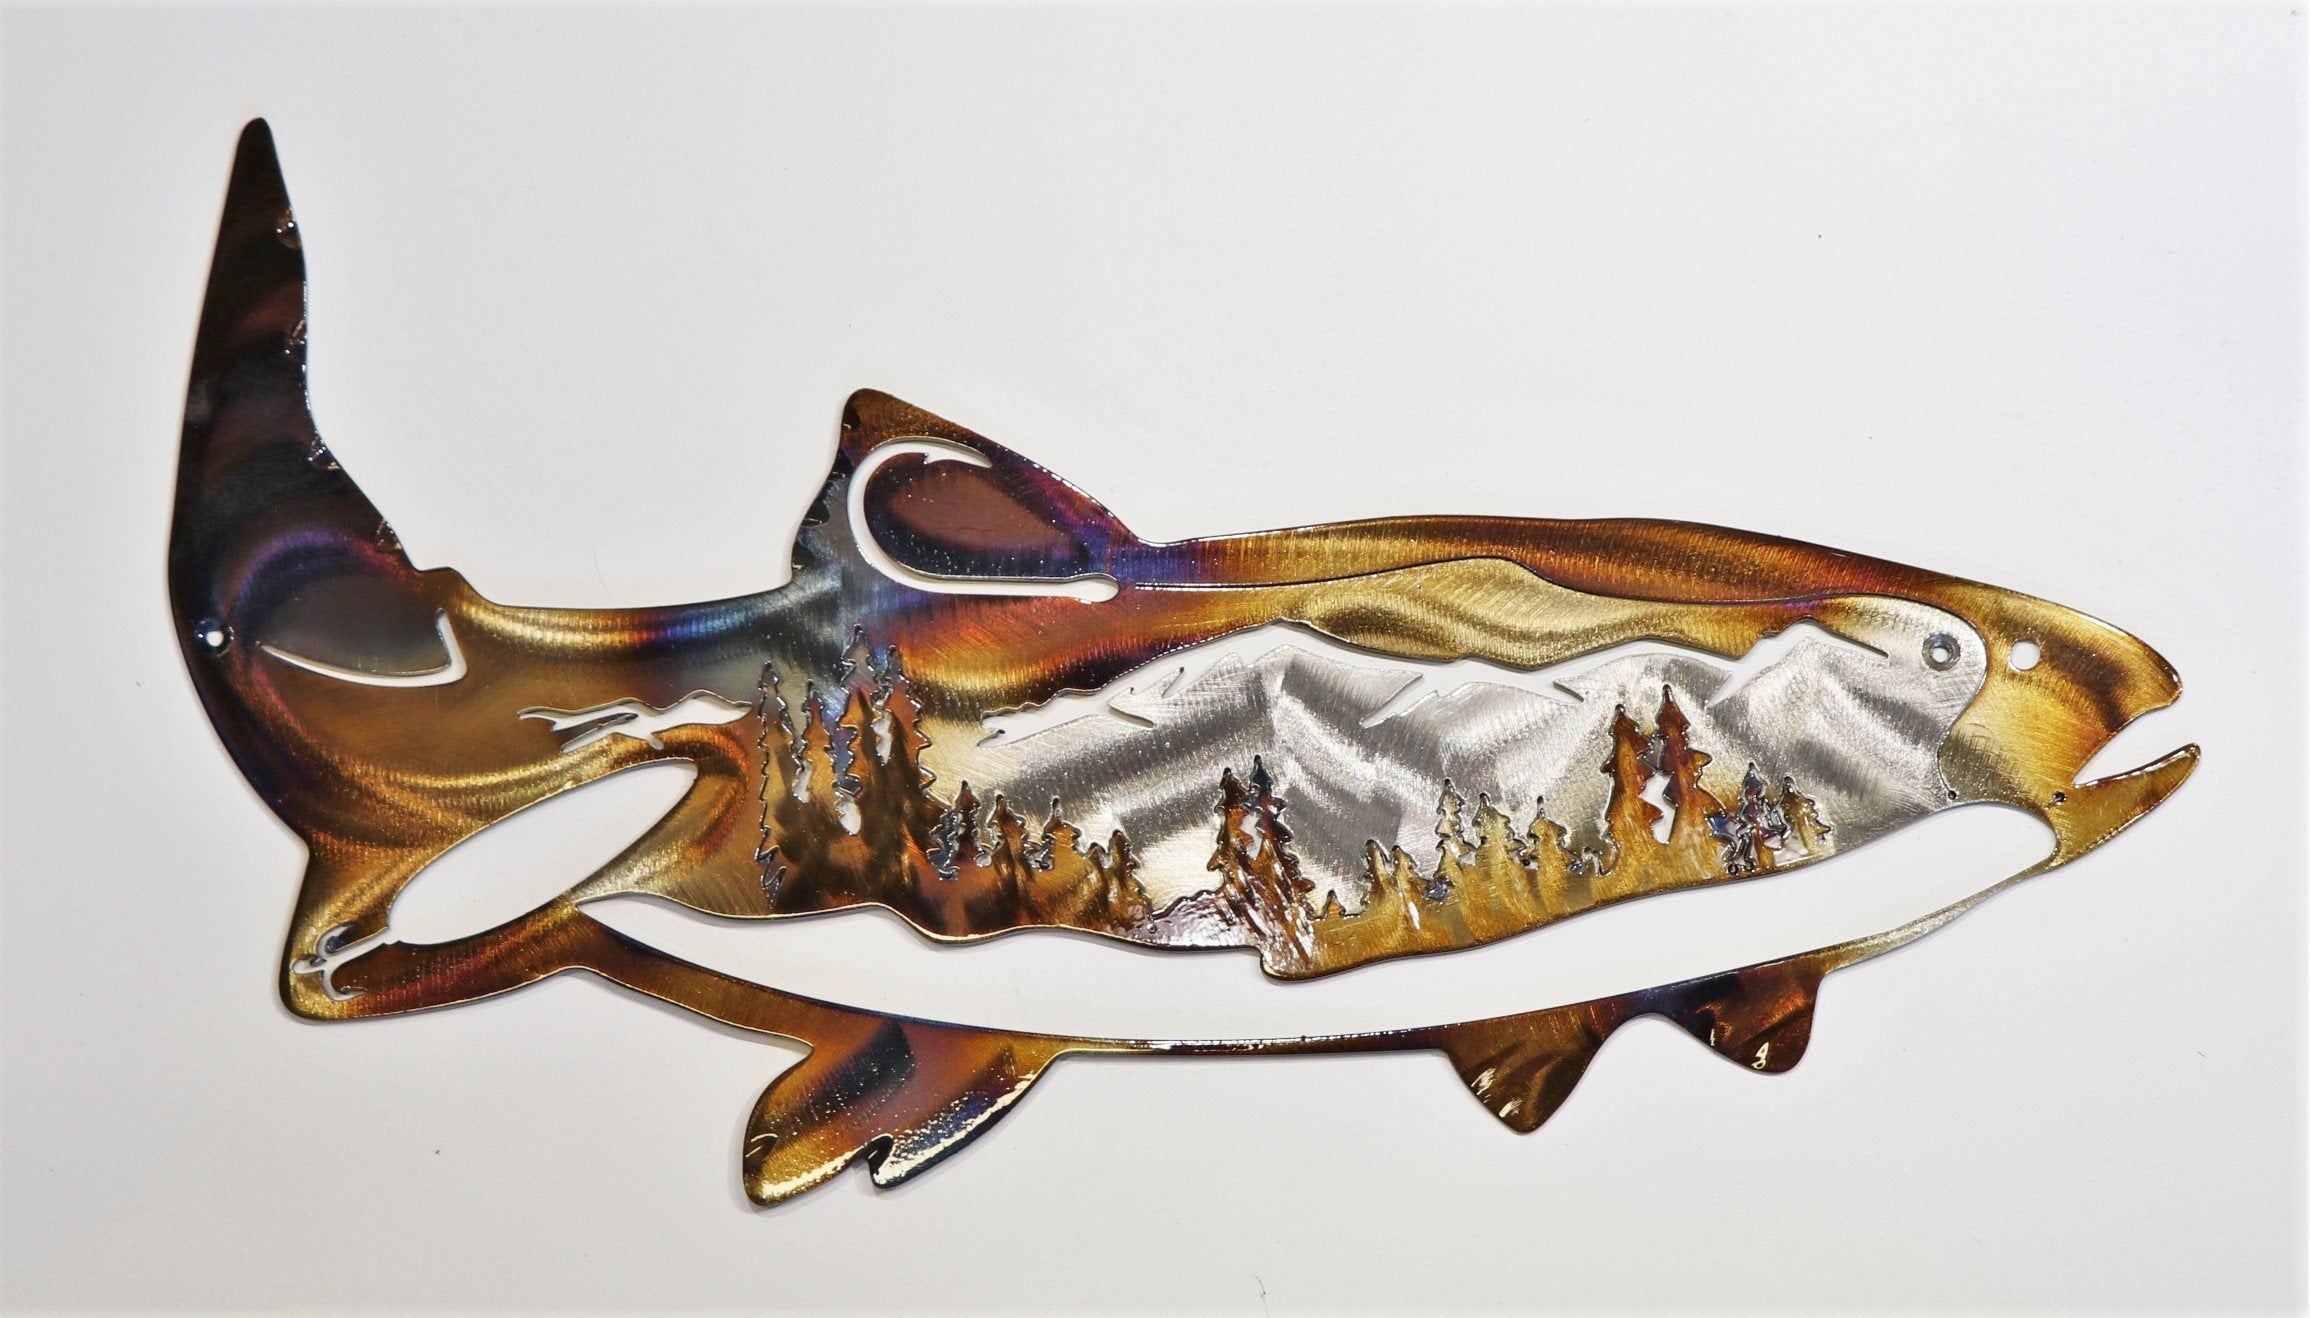 Fish Scene Metal Wall Art | Iron Mountain Studios Intended For 2017 Fish Wall Art (View 13 of 20)